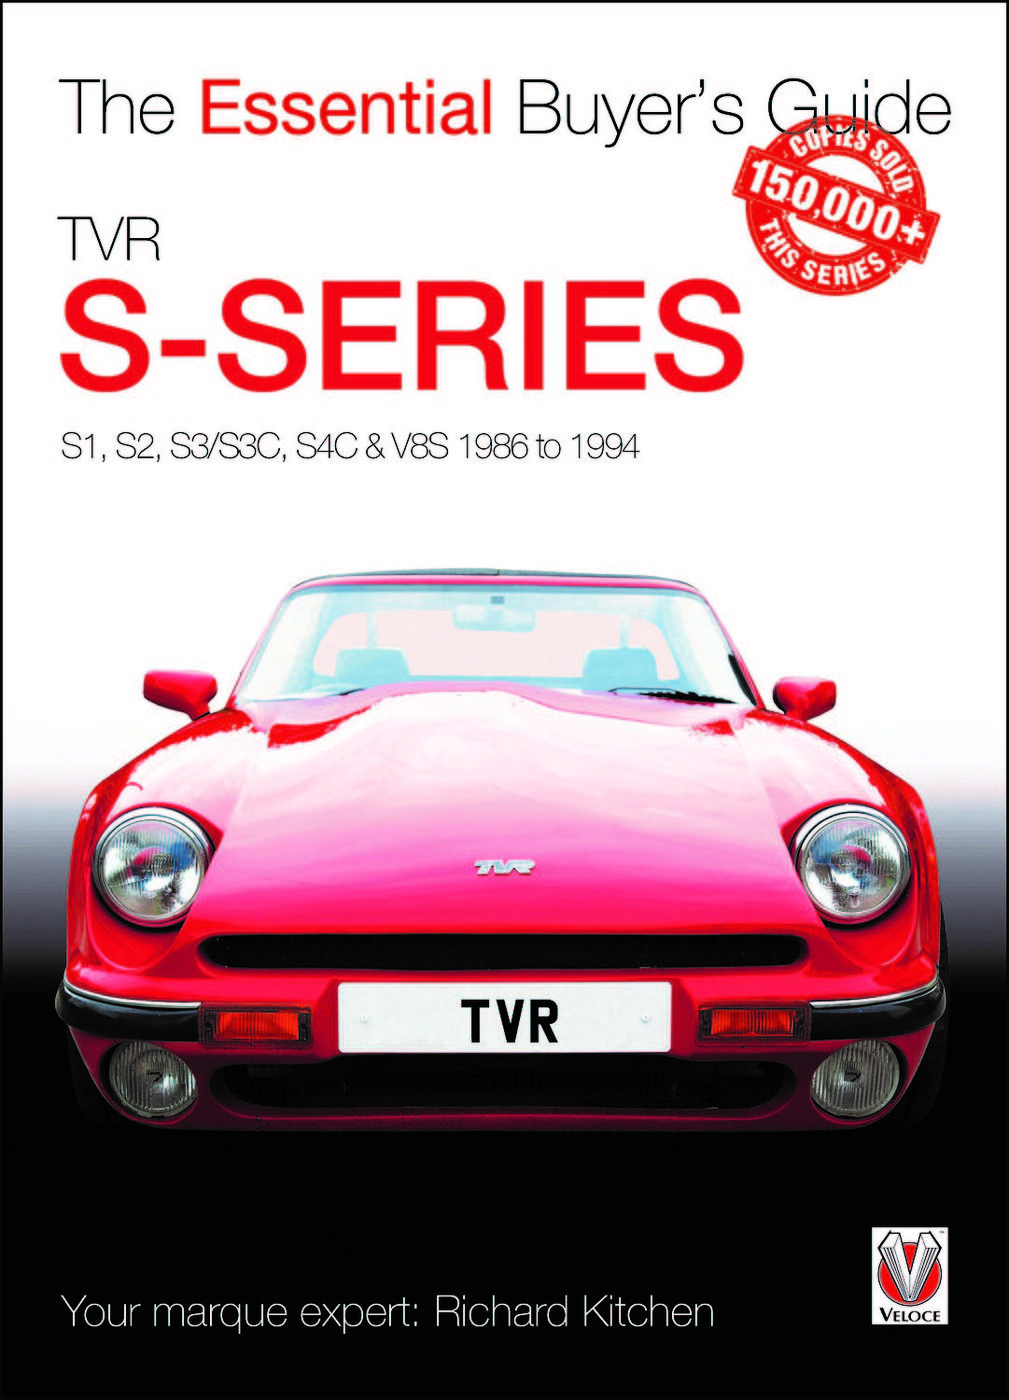 TVR S-series S1 1986 to 1995